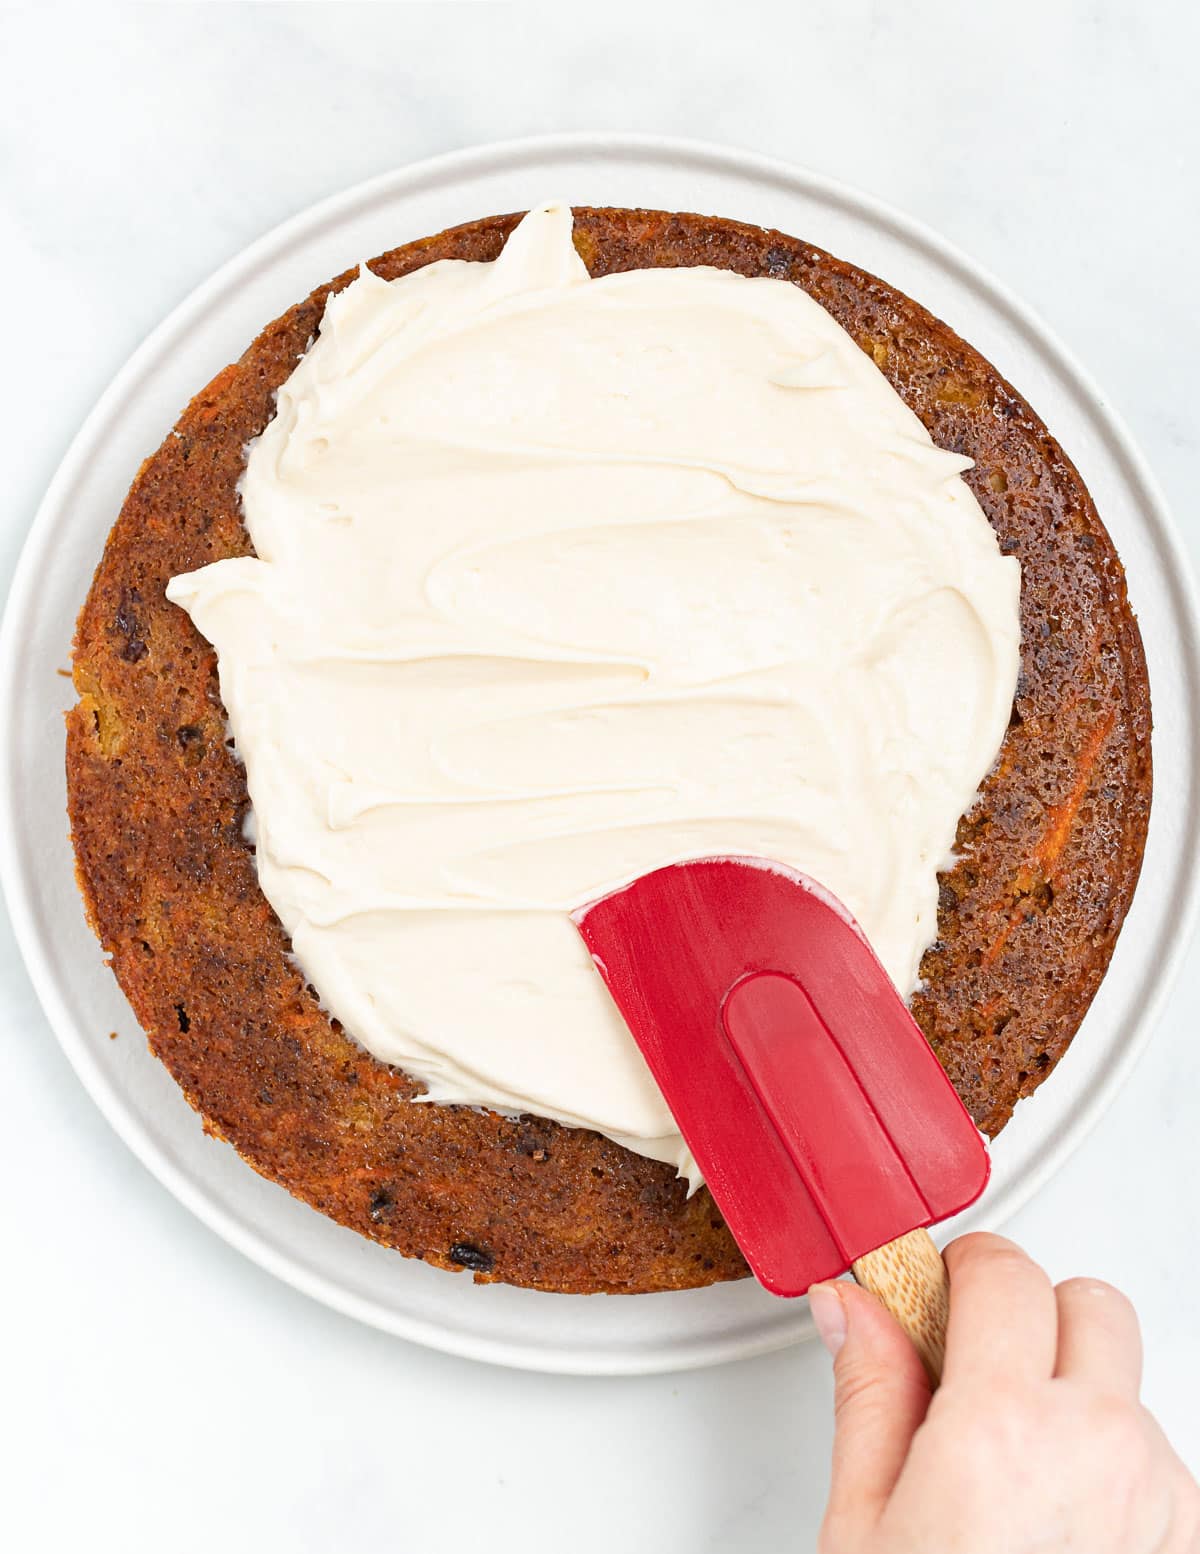 vegan cream cheese being spread on a cake layer with a red spatula